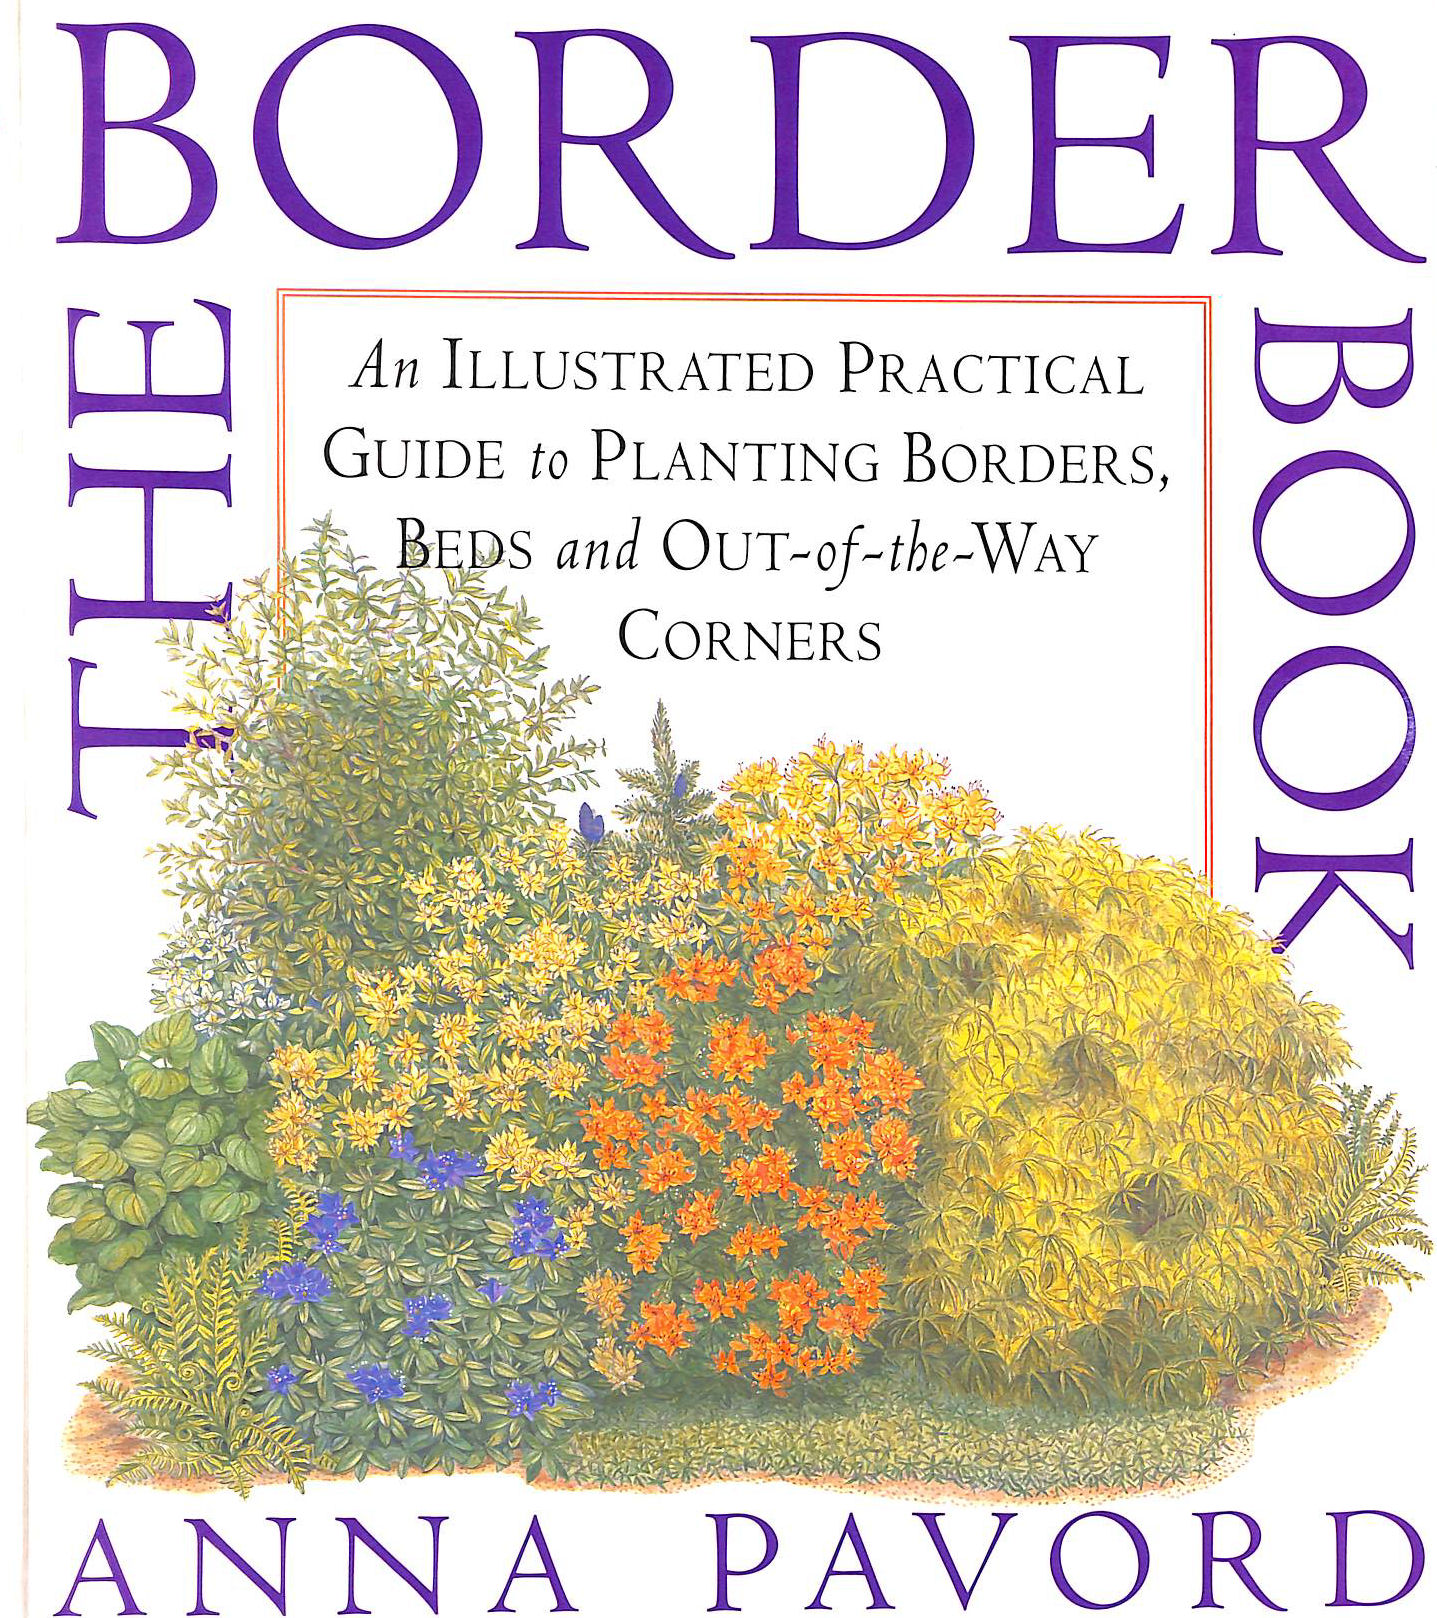 PAVORD, ANNA - The BORDER Book : An Illustrated Practical Guide to Planting Borders, Beds and Out-of-the-Way Corners.